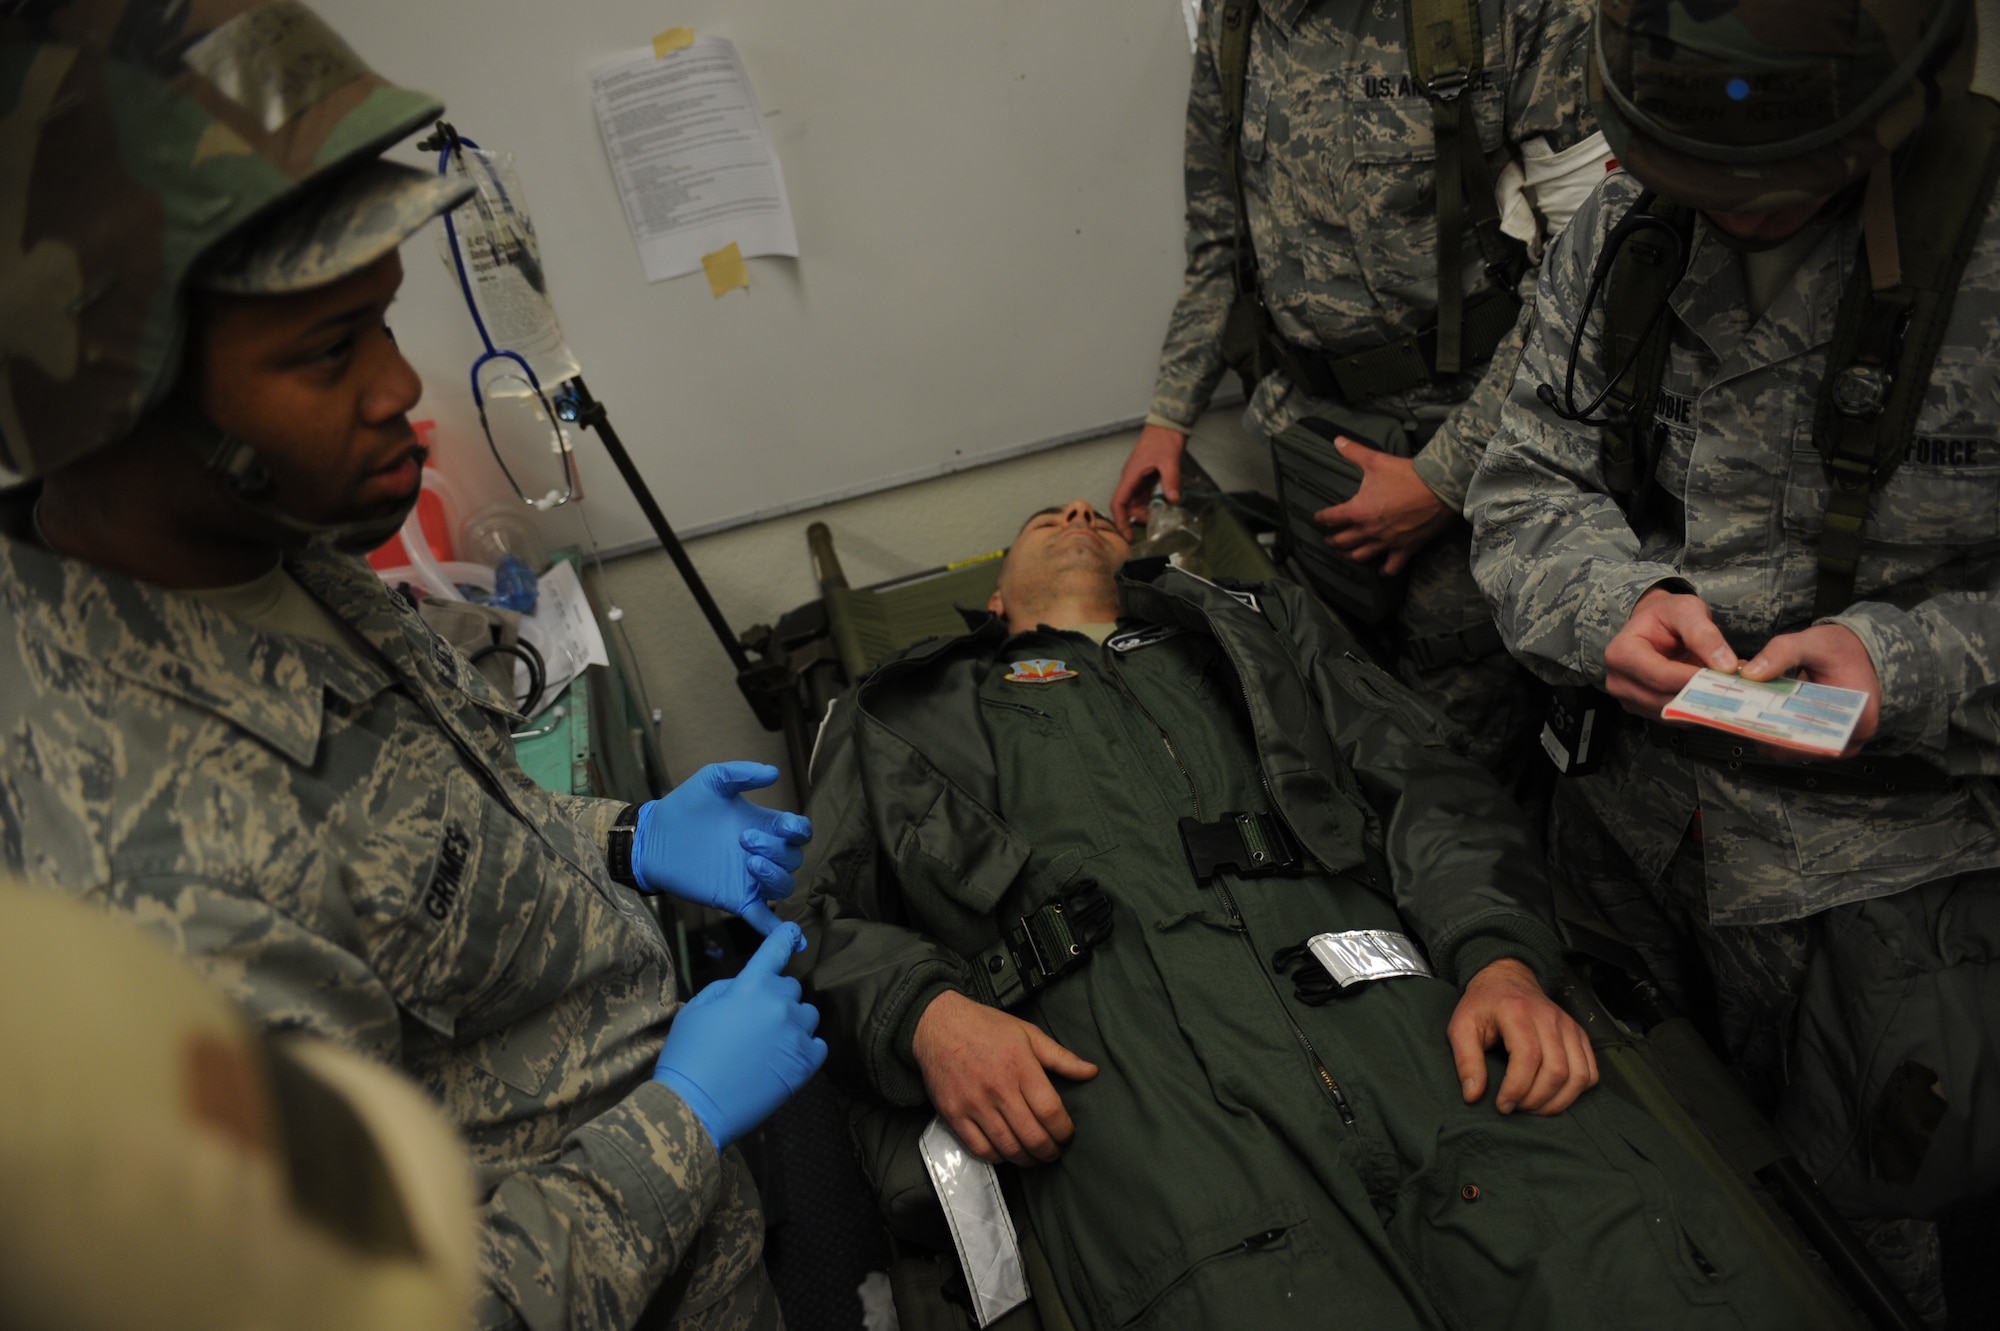 An injured patient lies unconscious on a stretcher while medical personnel evaluate him Feb. 13, 2013, at Mountain Home Air Force Base, Idaho. Medical personnel were tested on a wide variety of issues and problems throughout the Operational Readiness Exercise. (U.S. Air Force photo/Senior Airman Benjamin Sutton)